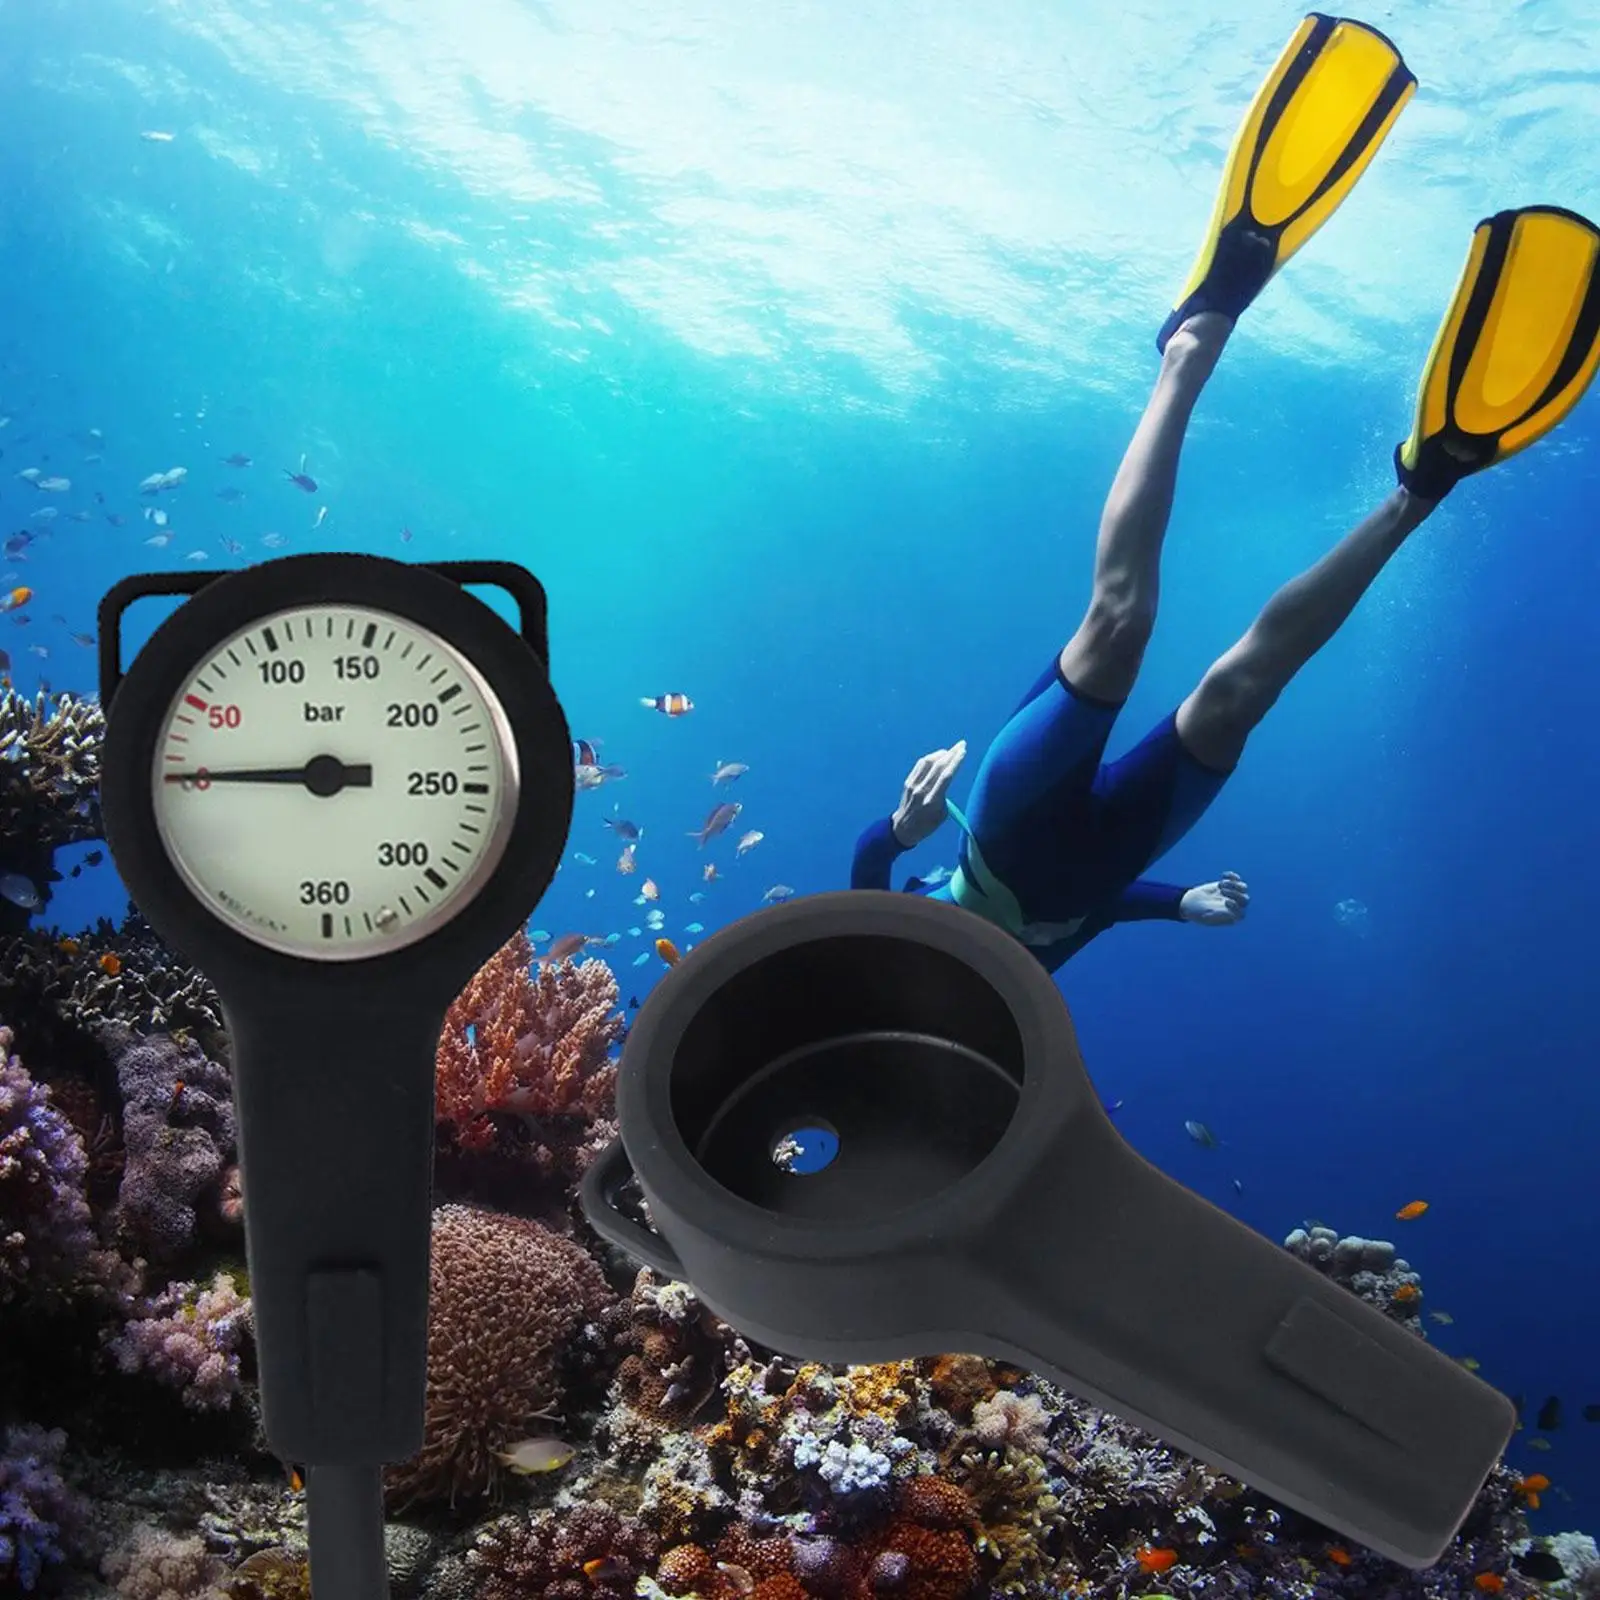 Scuba Pressure Gauge Boot Protection from Bumps, Scratches, Wear and Tear